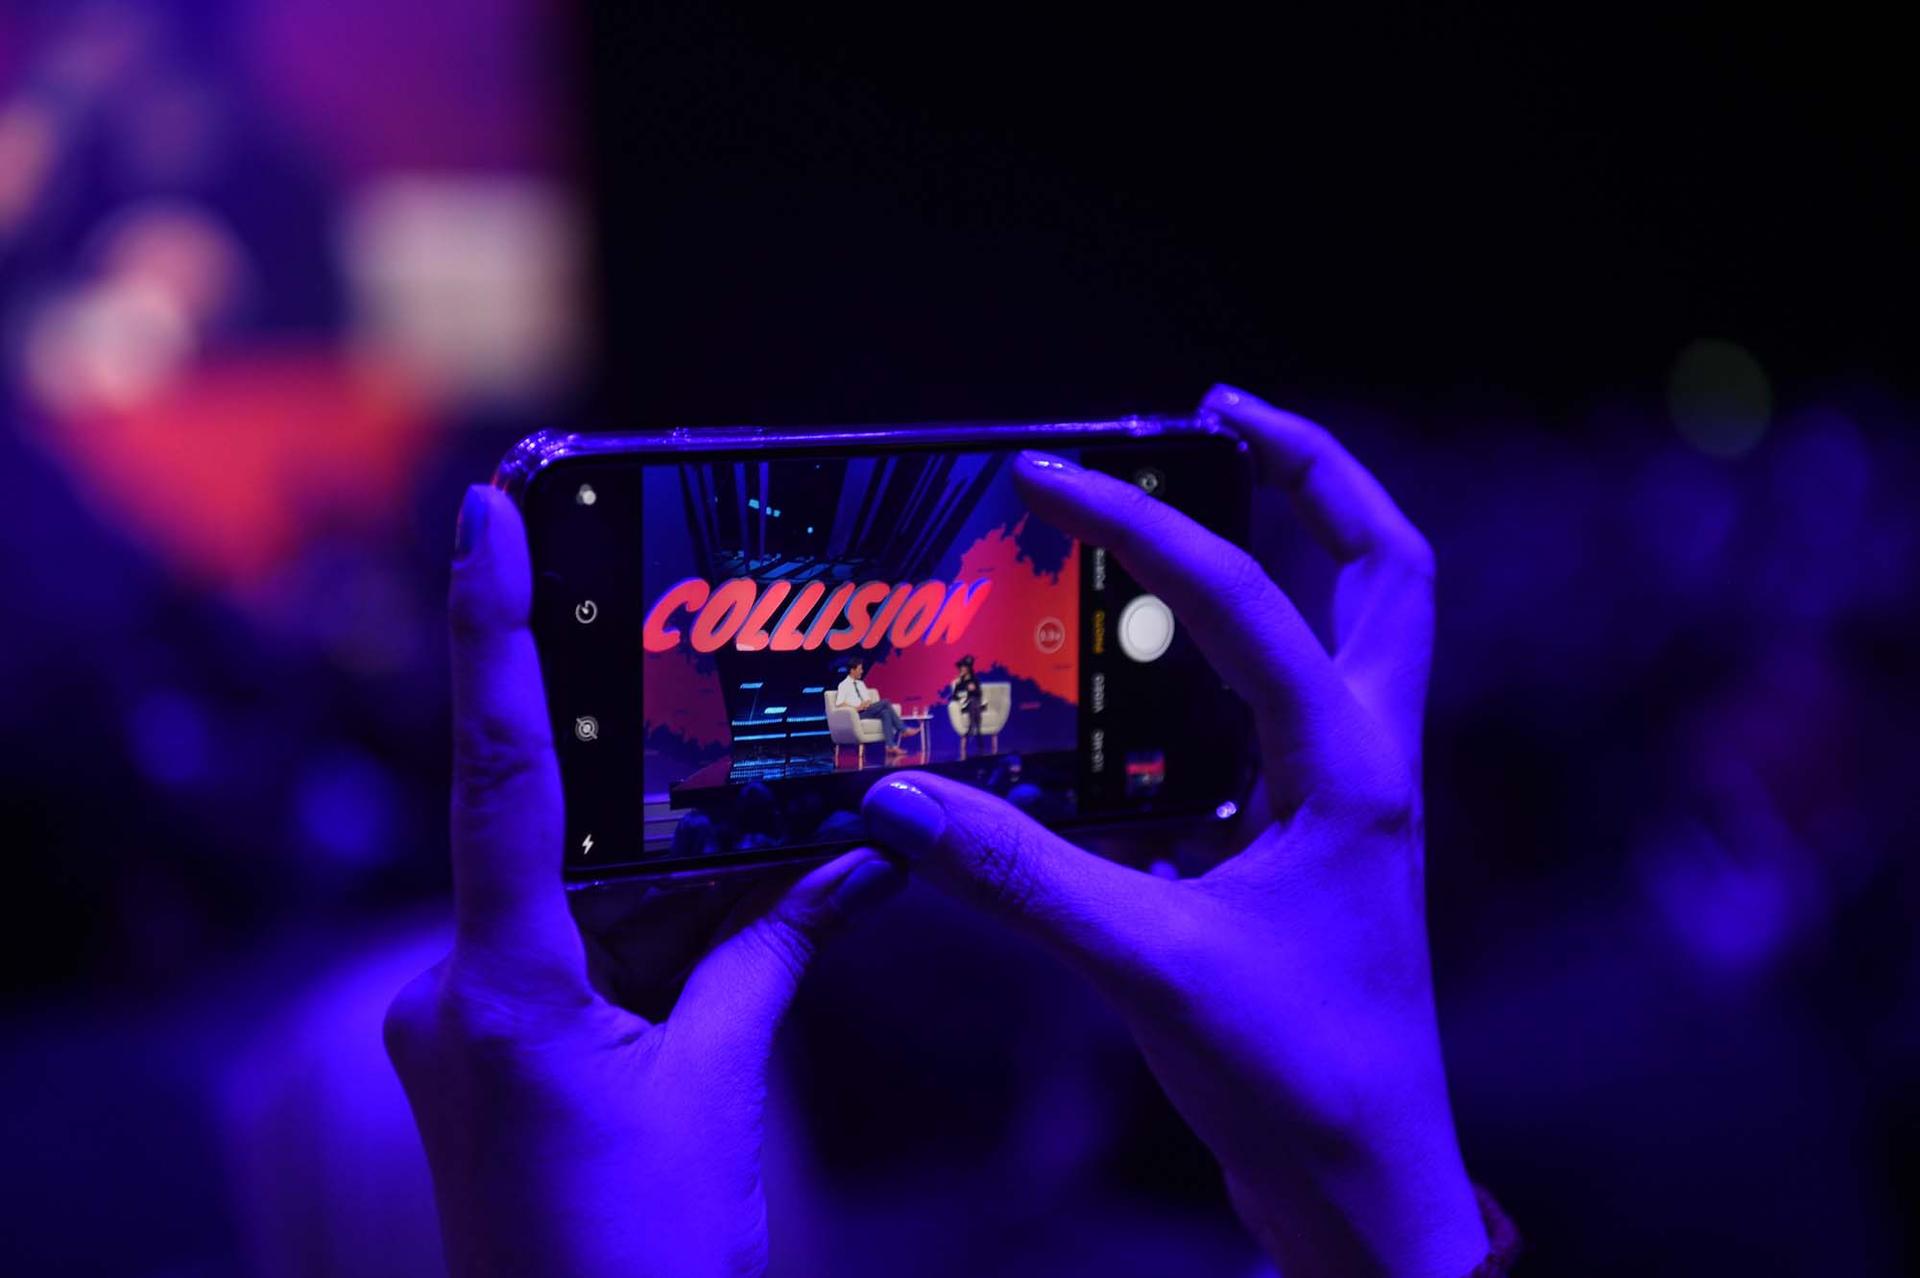 hands holding a phone at collision Conference 2019 in Toronto, Ontario